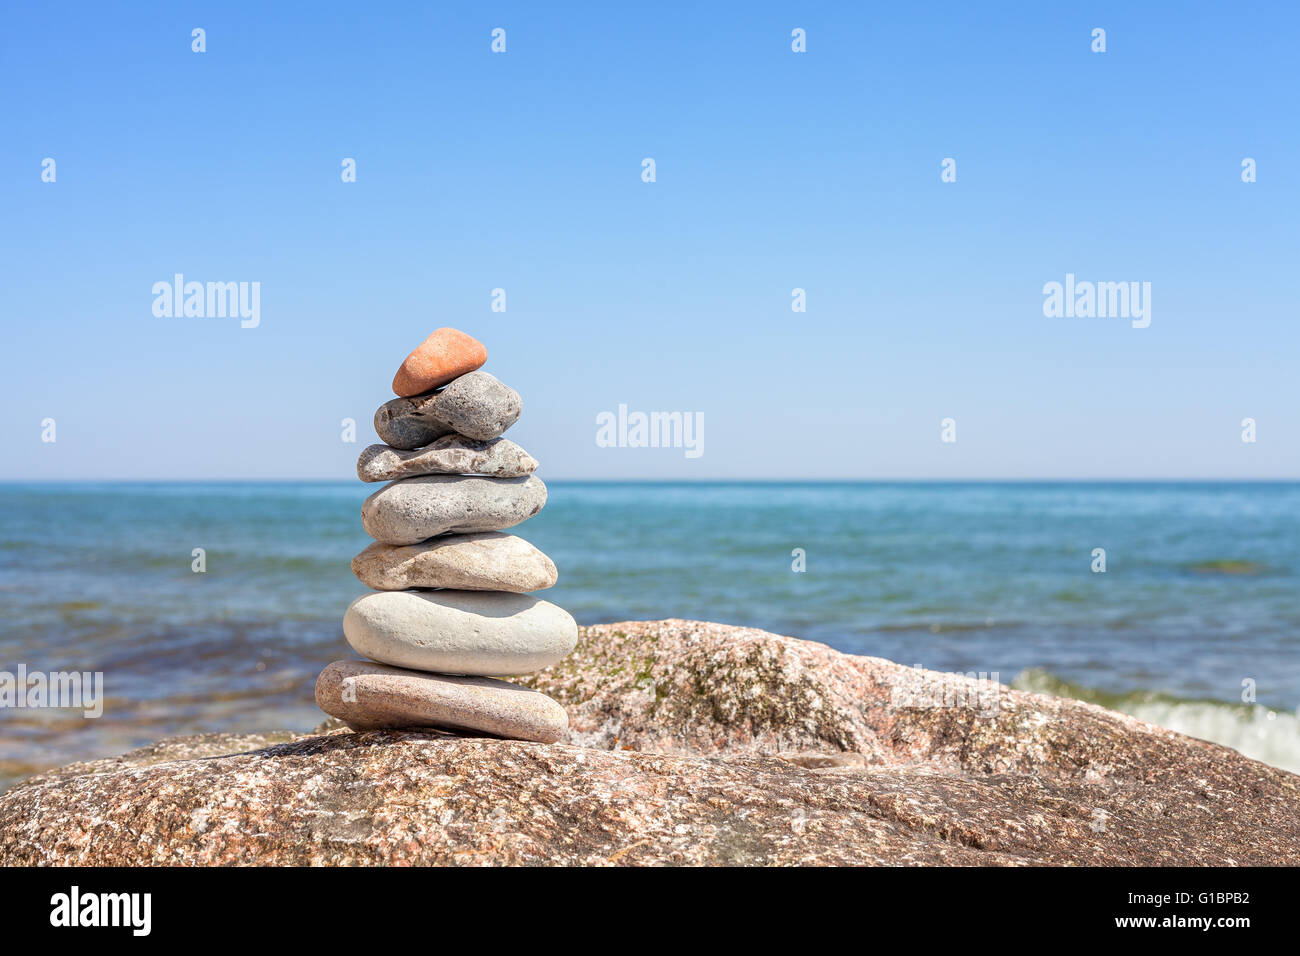 Stones on a beach, balance and harmony concept background, shallow depth of field. Stock Photo